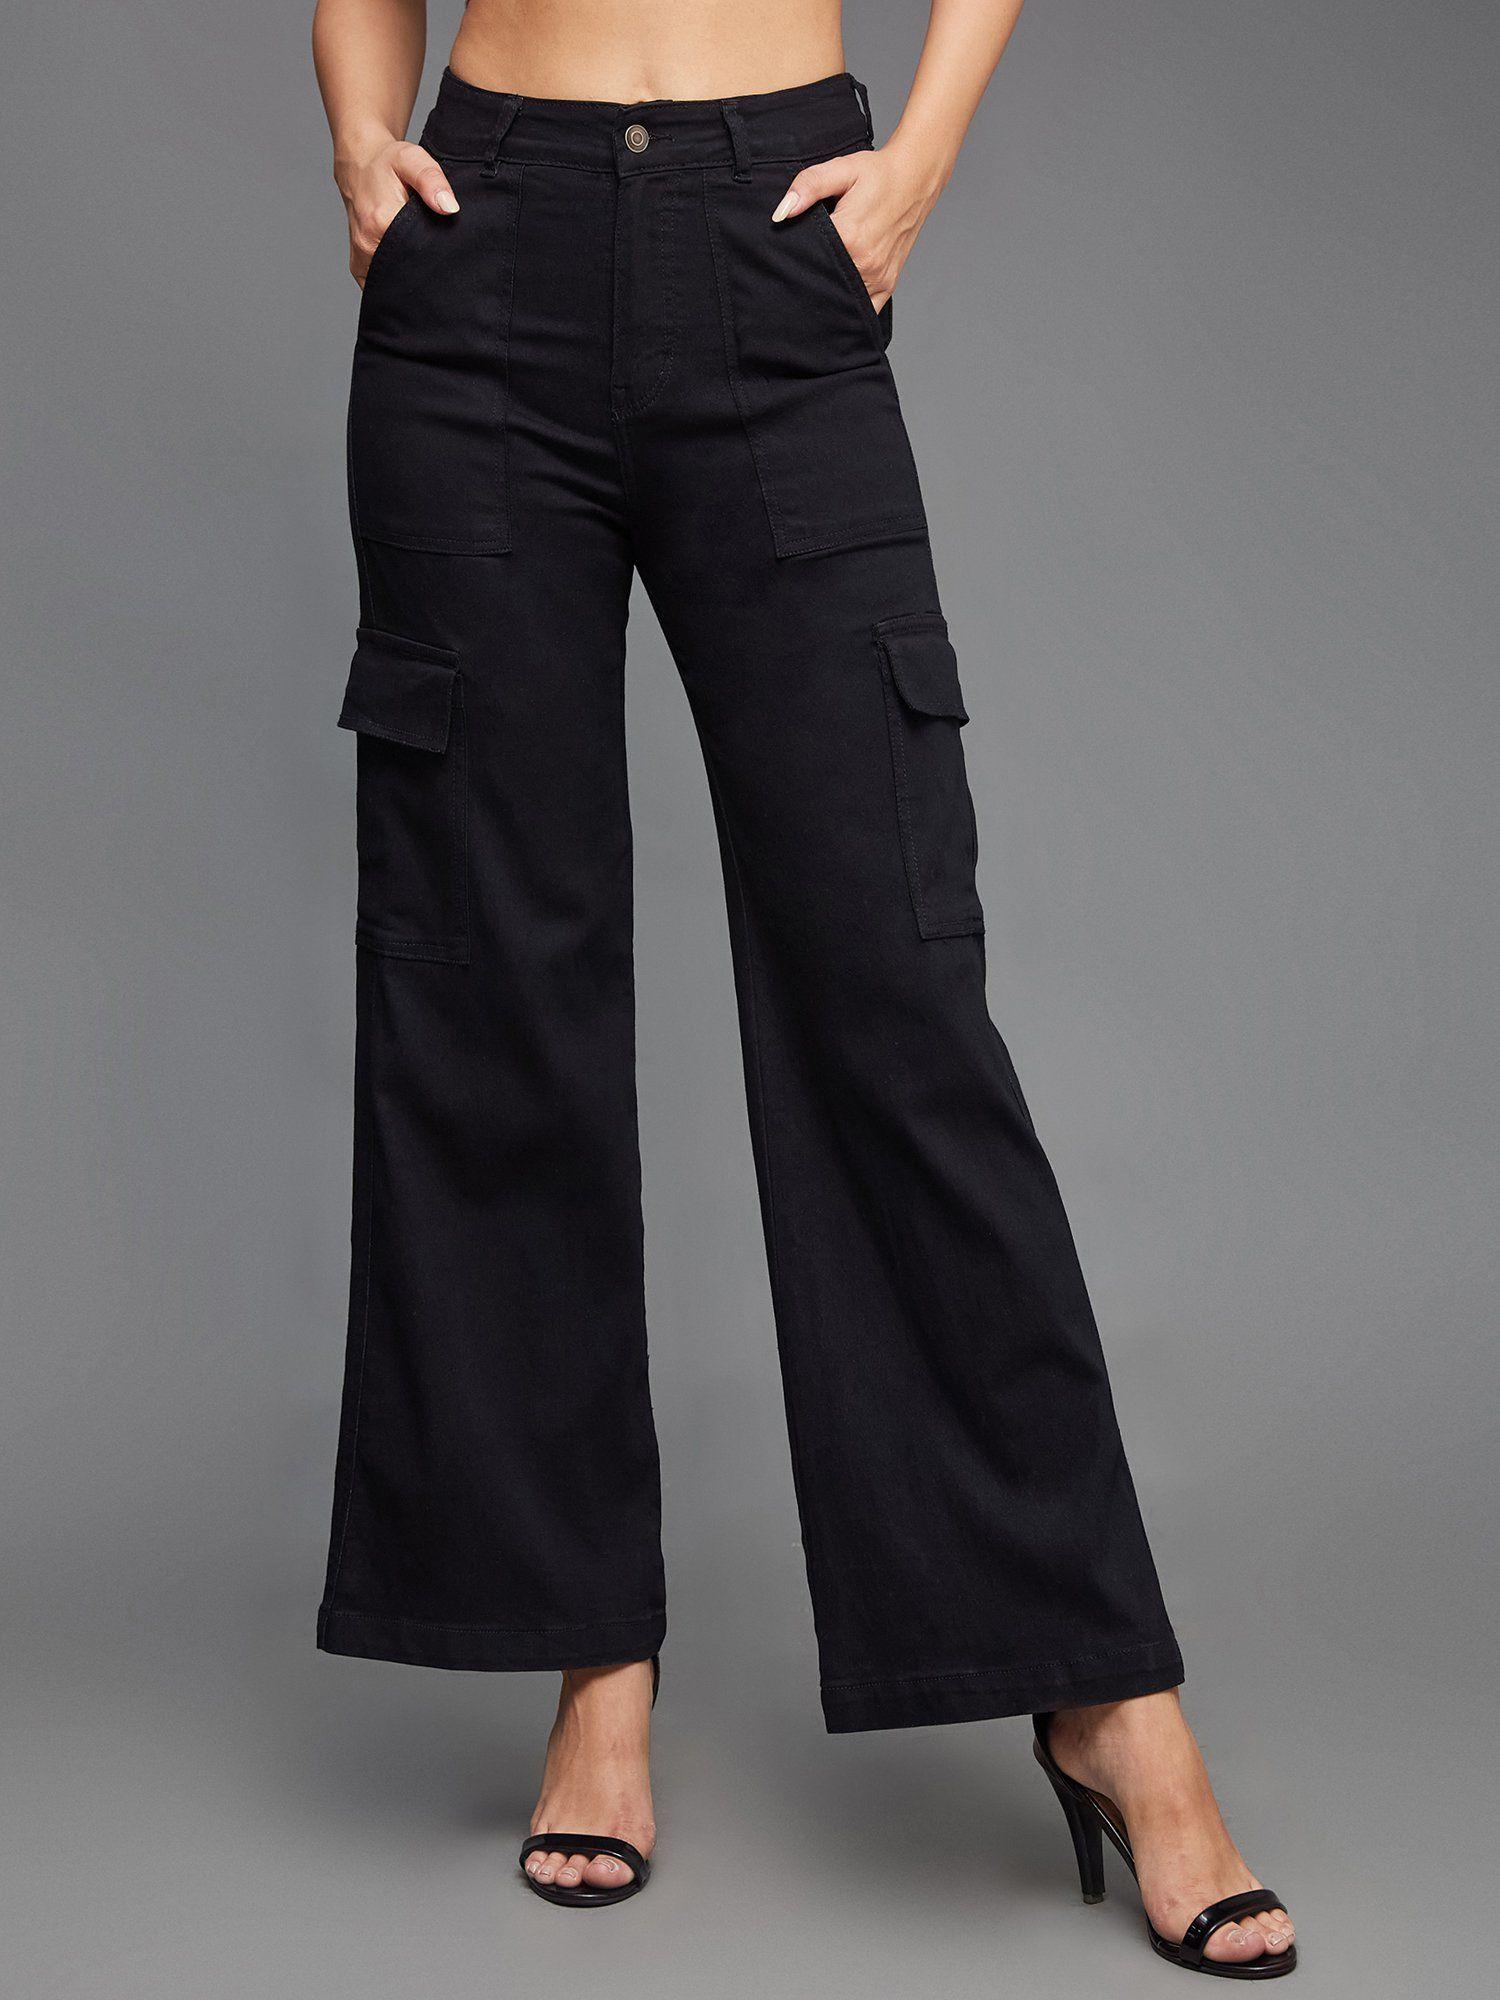 womens black wide-leg high-rise clean-look stretchable denim cargo jeans